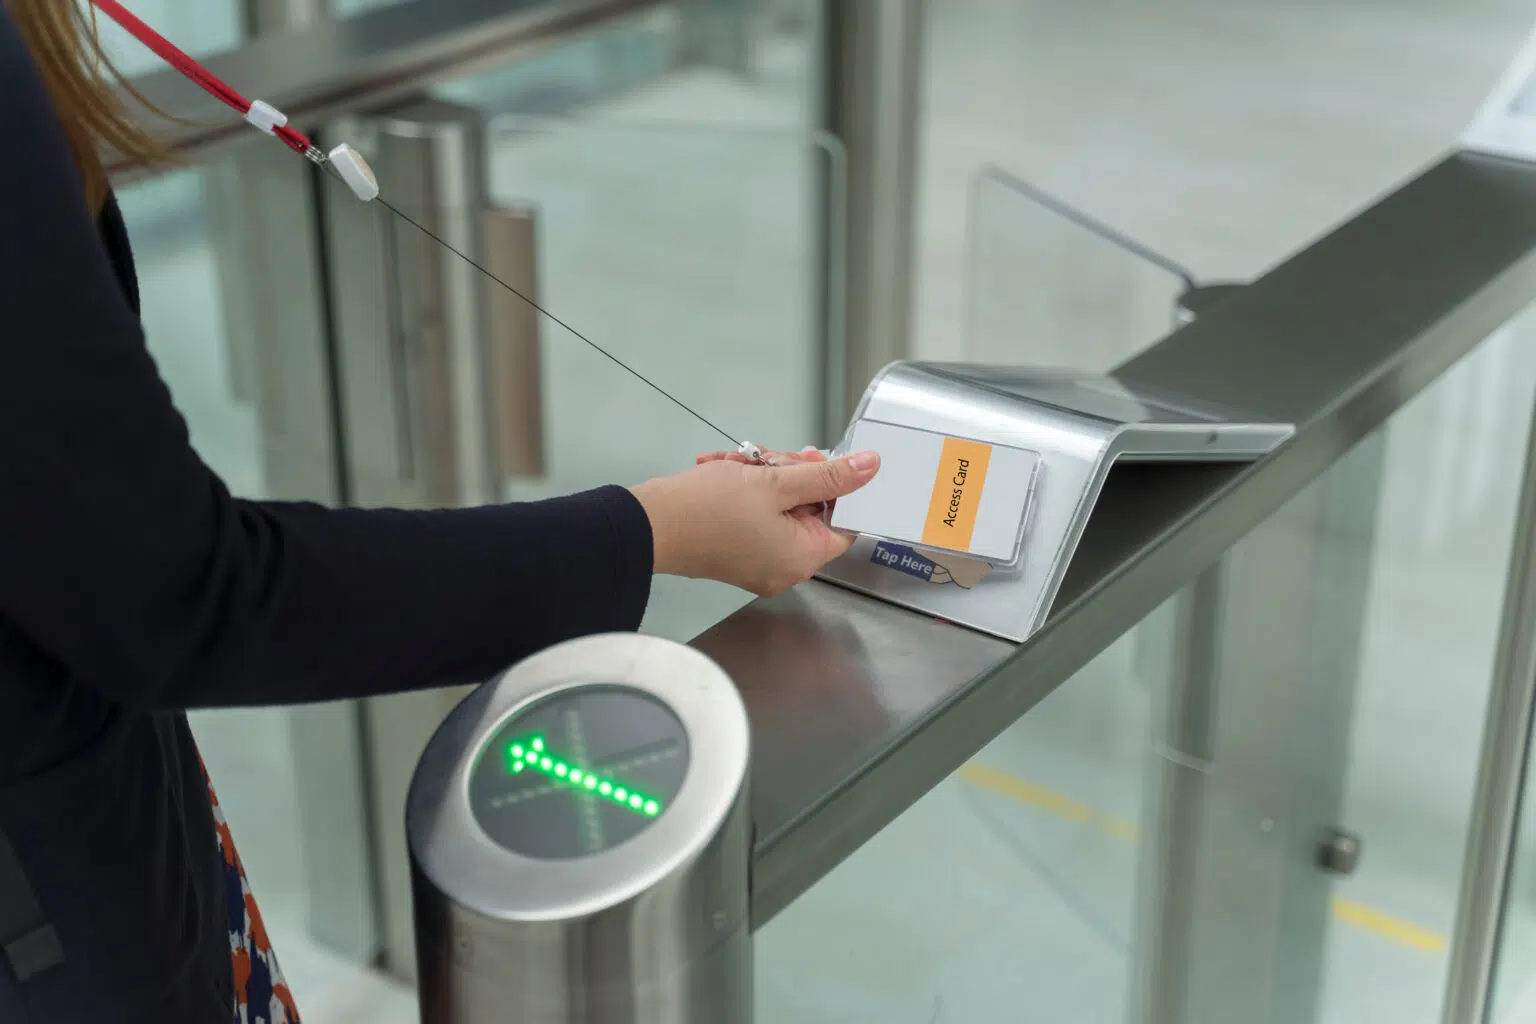 women holding key card access control to unlock security at an entry badgagent